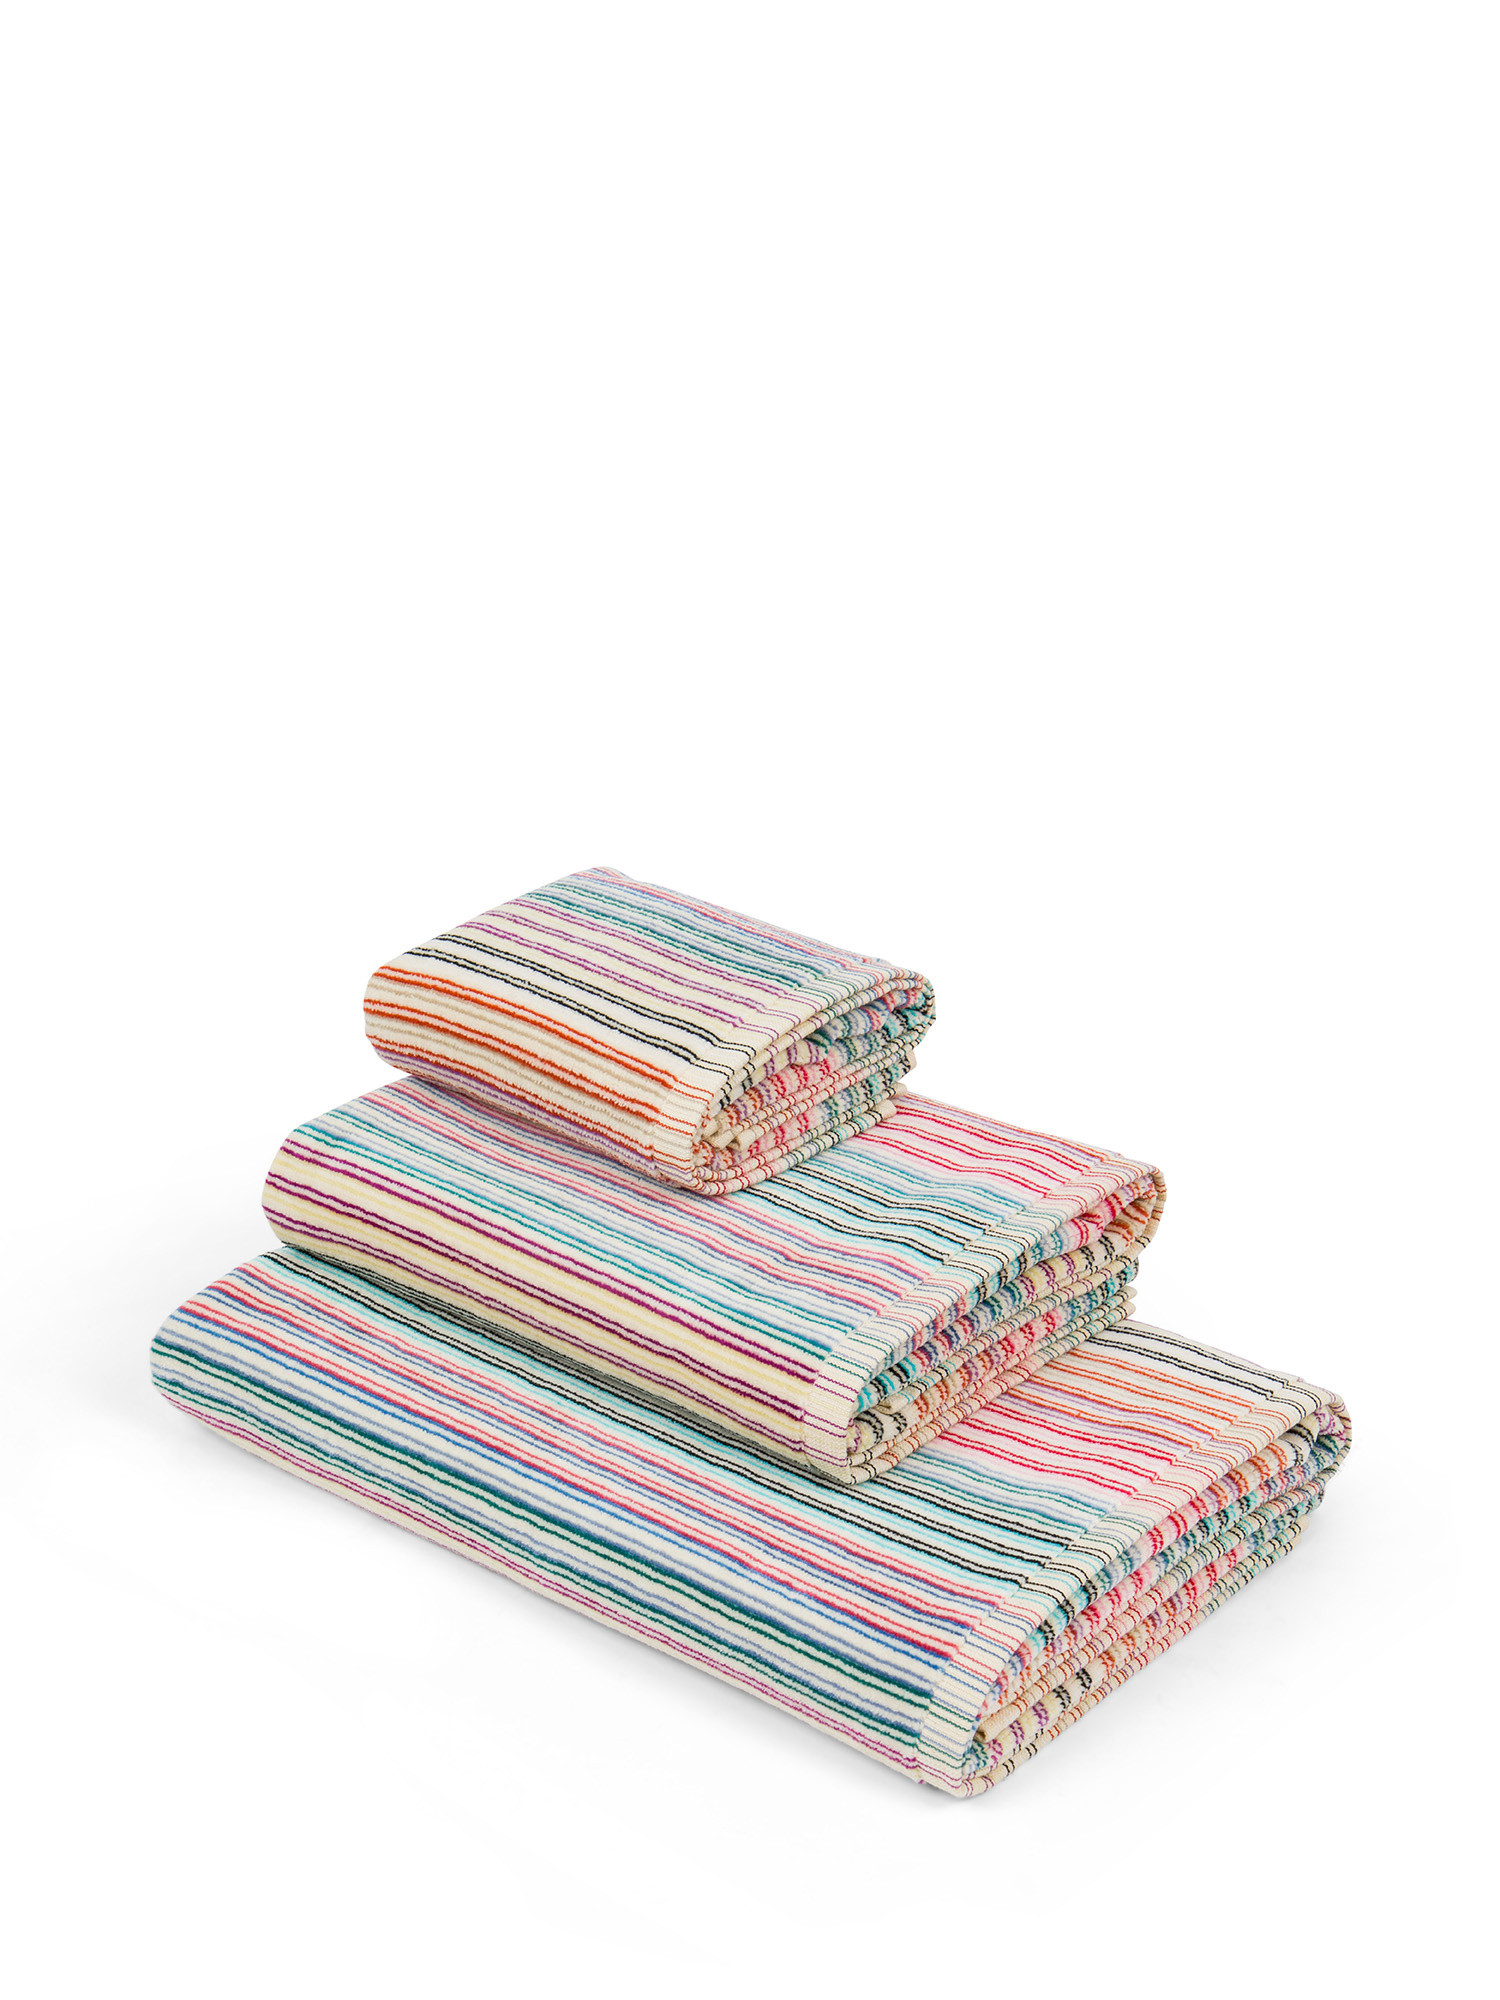 Cotton terry towel with stripes pattern, Multicolor, large image number 0